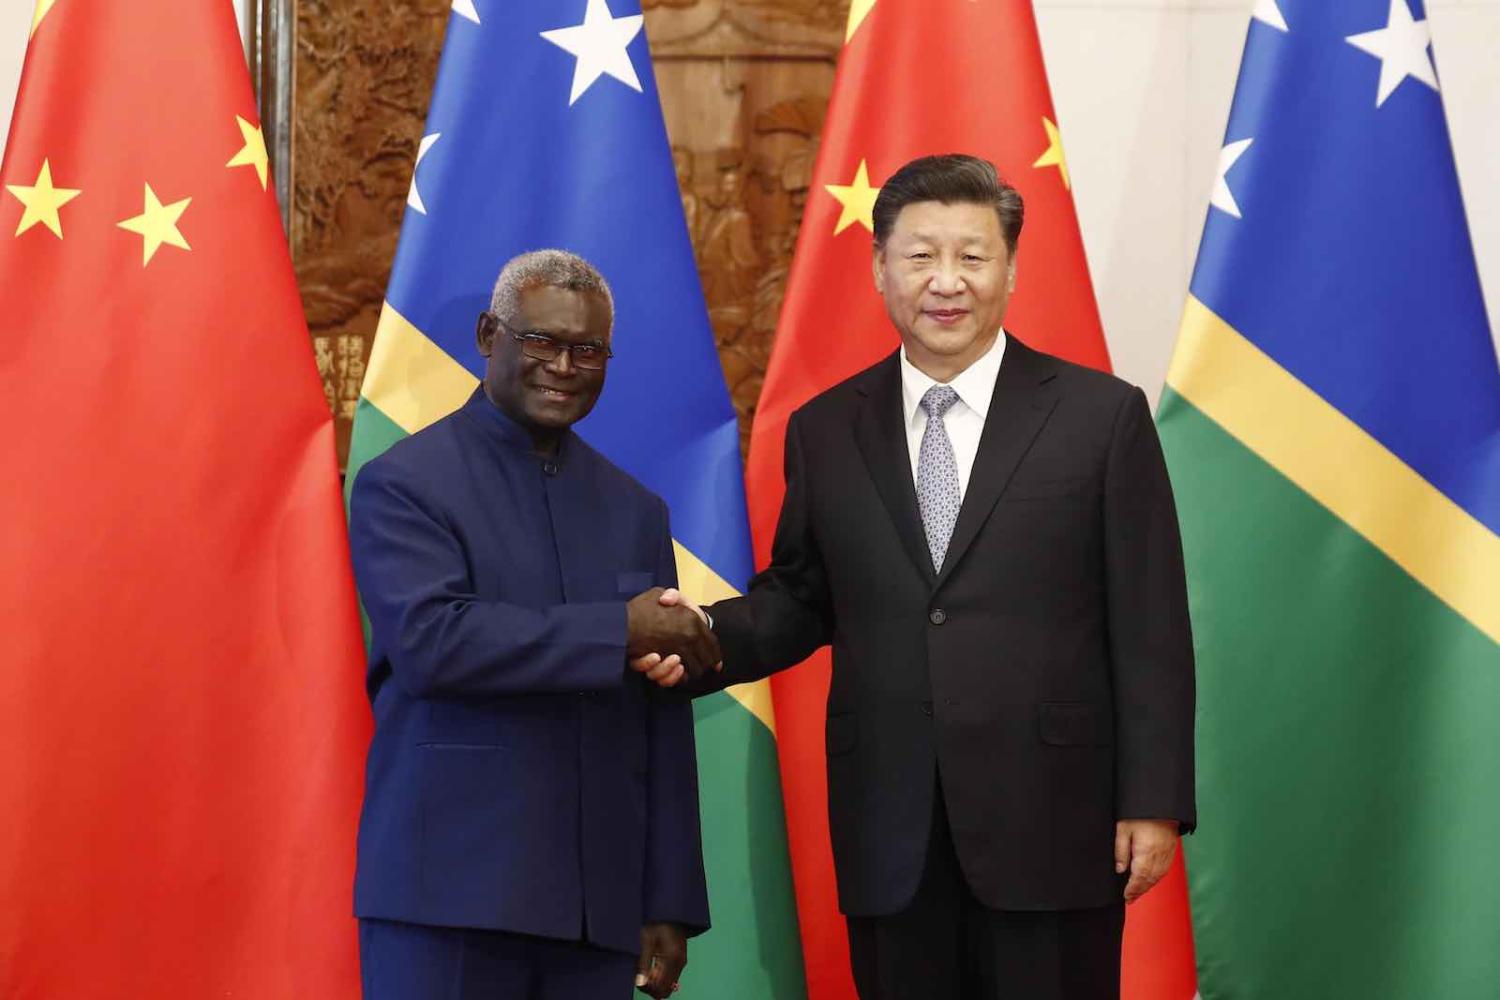 Solomon Islands’ Prime Minister Manasseh Sogavare and China’s Xi Jinping on 8 October in Beijing (Photo: Sheng Jiapeng/VCG/Getty Images)